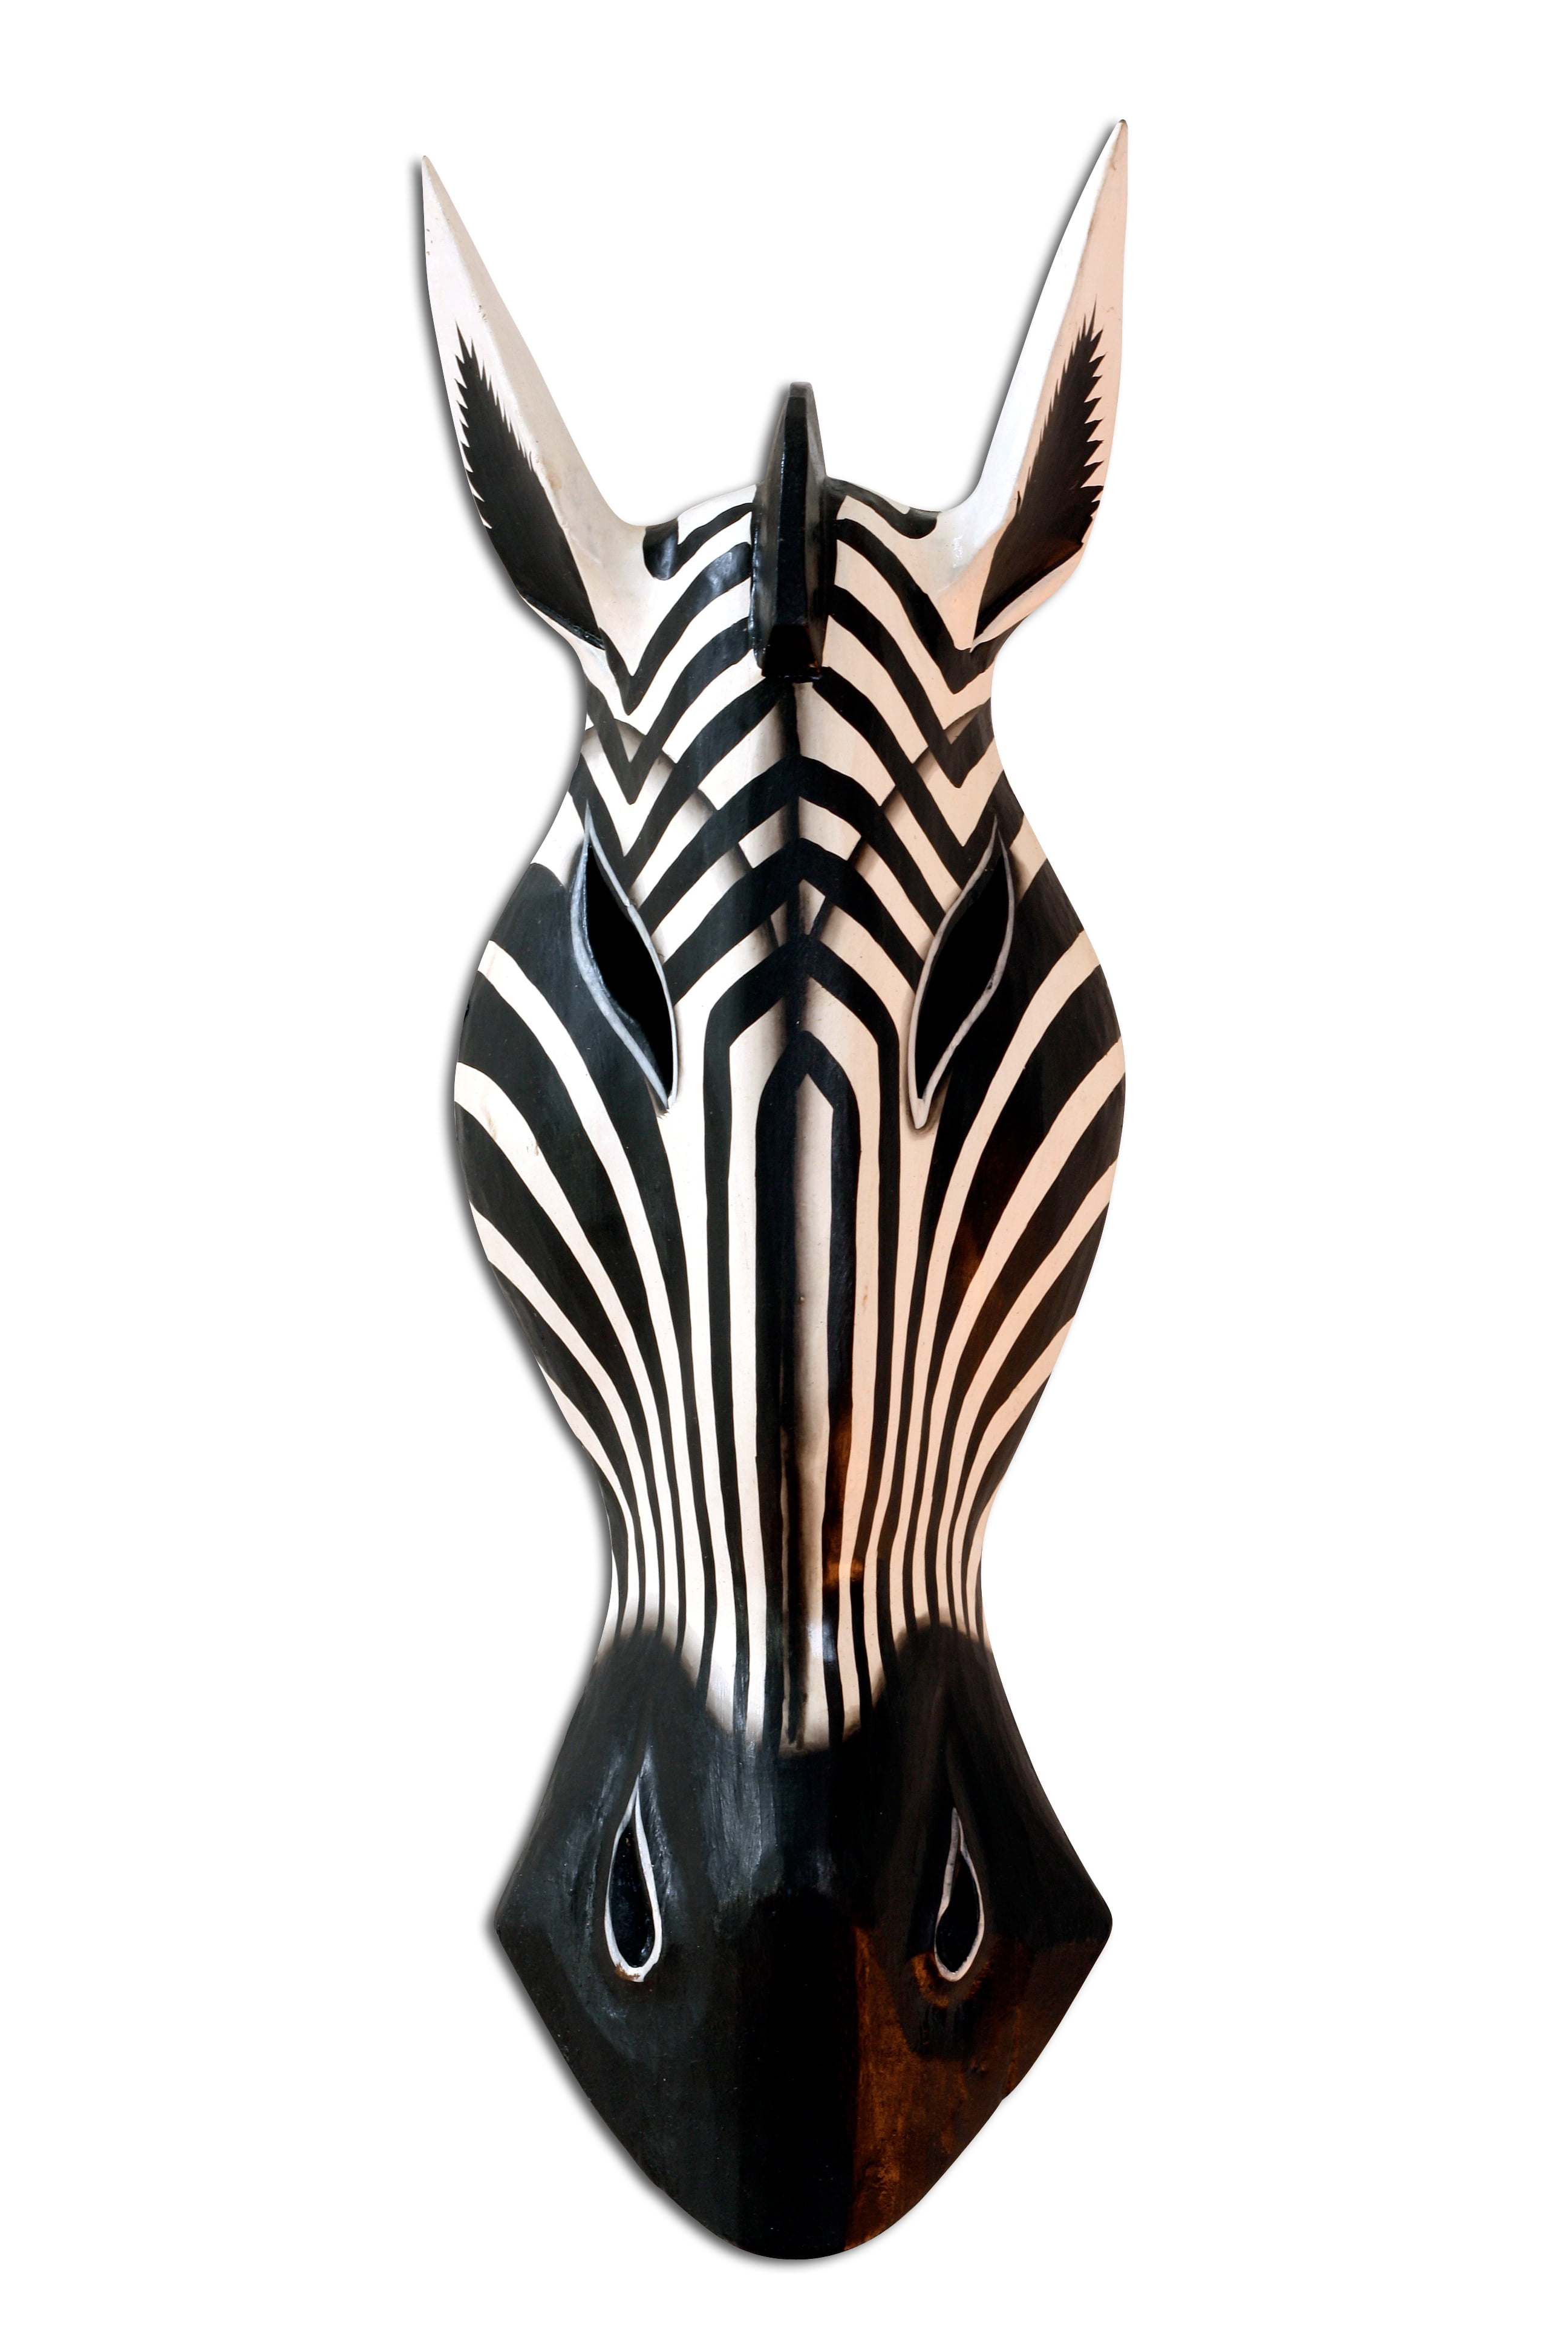 Wooden Tribal Zebra Mask Black White Stripe Carved Wall Plaque Hanging Home Decor Accent Art Unique Sculpture Decoration Handcrafted Size: 12" Tall x 5" Wide x 2" Deep - Walmart.com